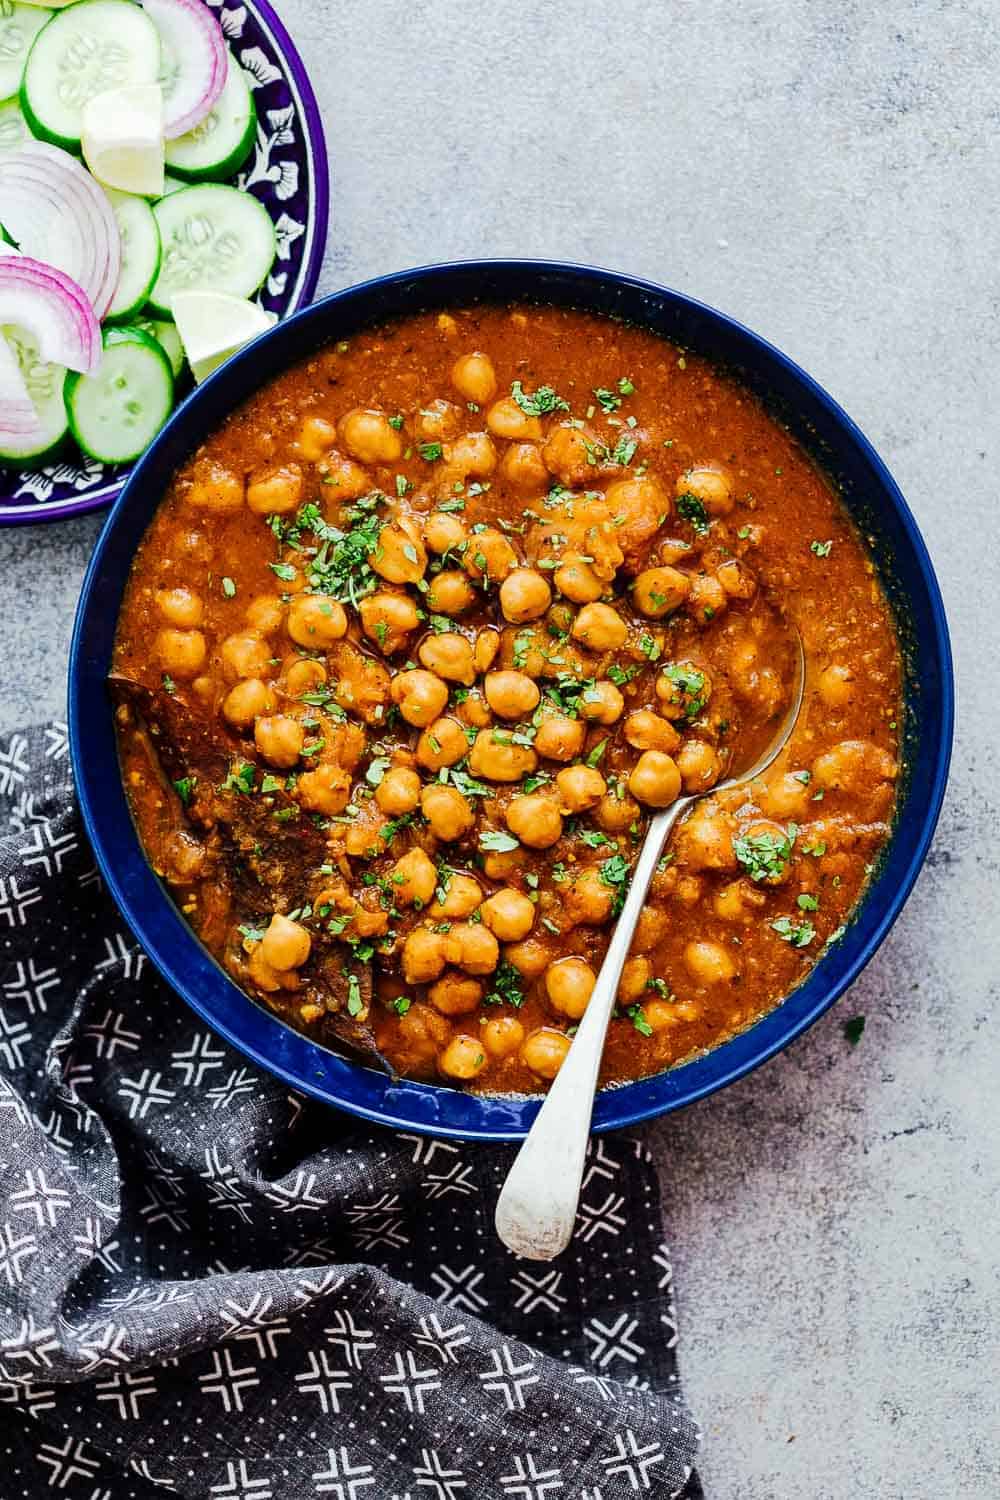 Pressure cooker chana masala in a blue bowl with cucumbers, onions etc on the side